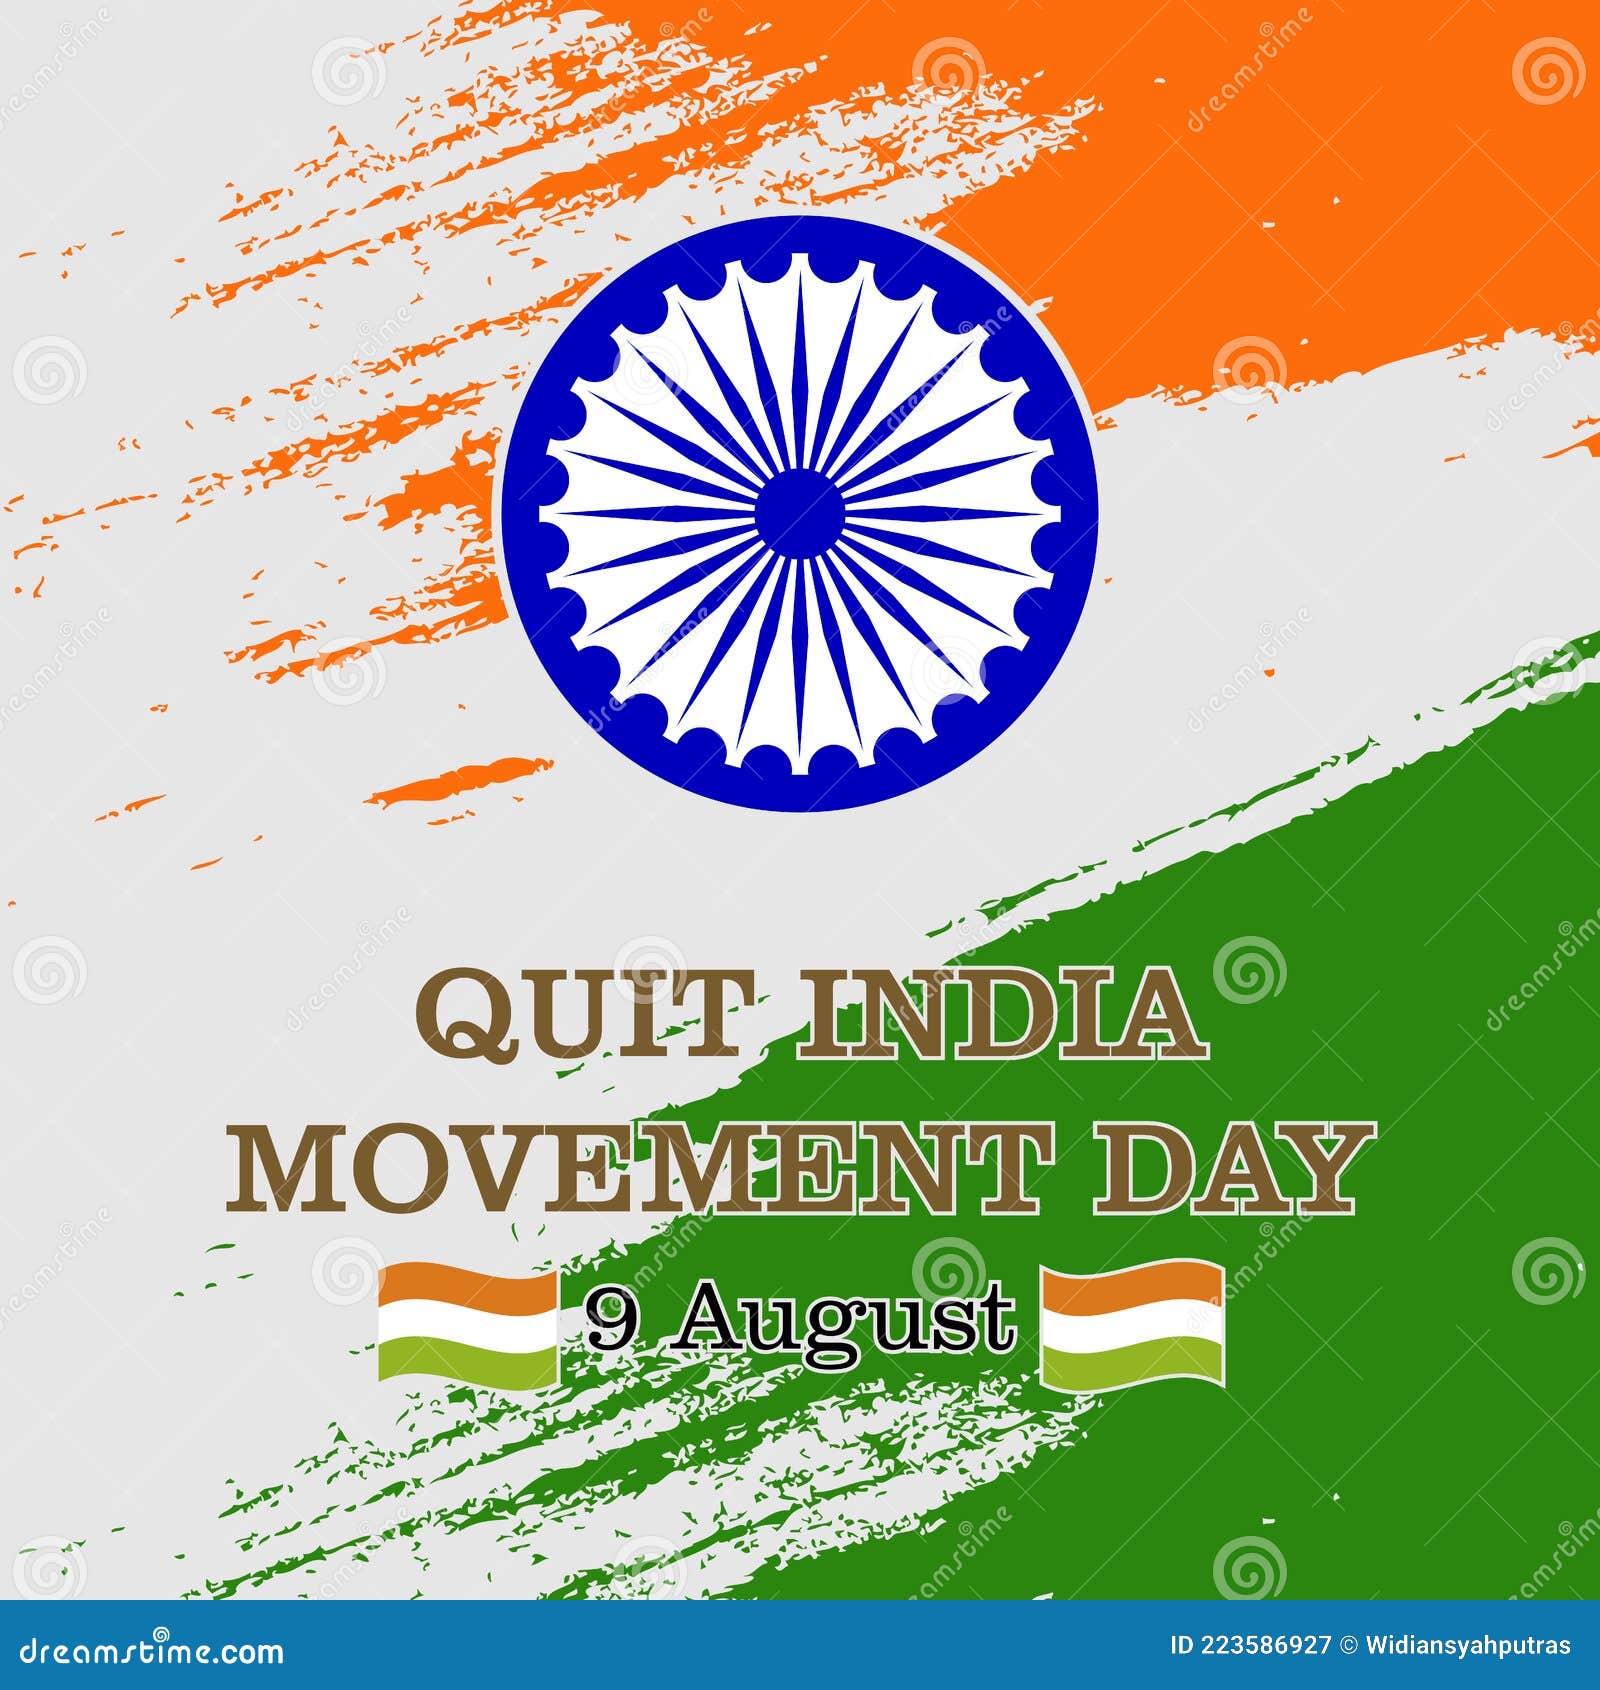 Vector Illustration Quit India Movement Day Is Celebrated Every 9th August Against A Background Of Colored Scribbles Of The Indi Stock Vector Illustration Of Sardar Indi